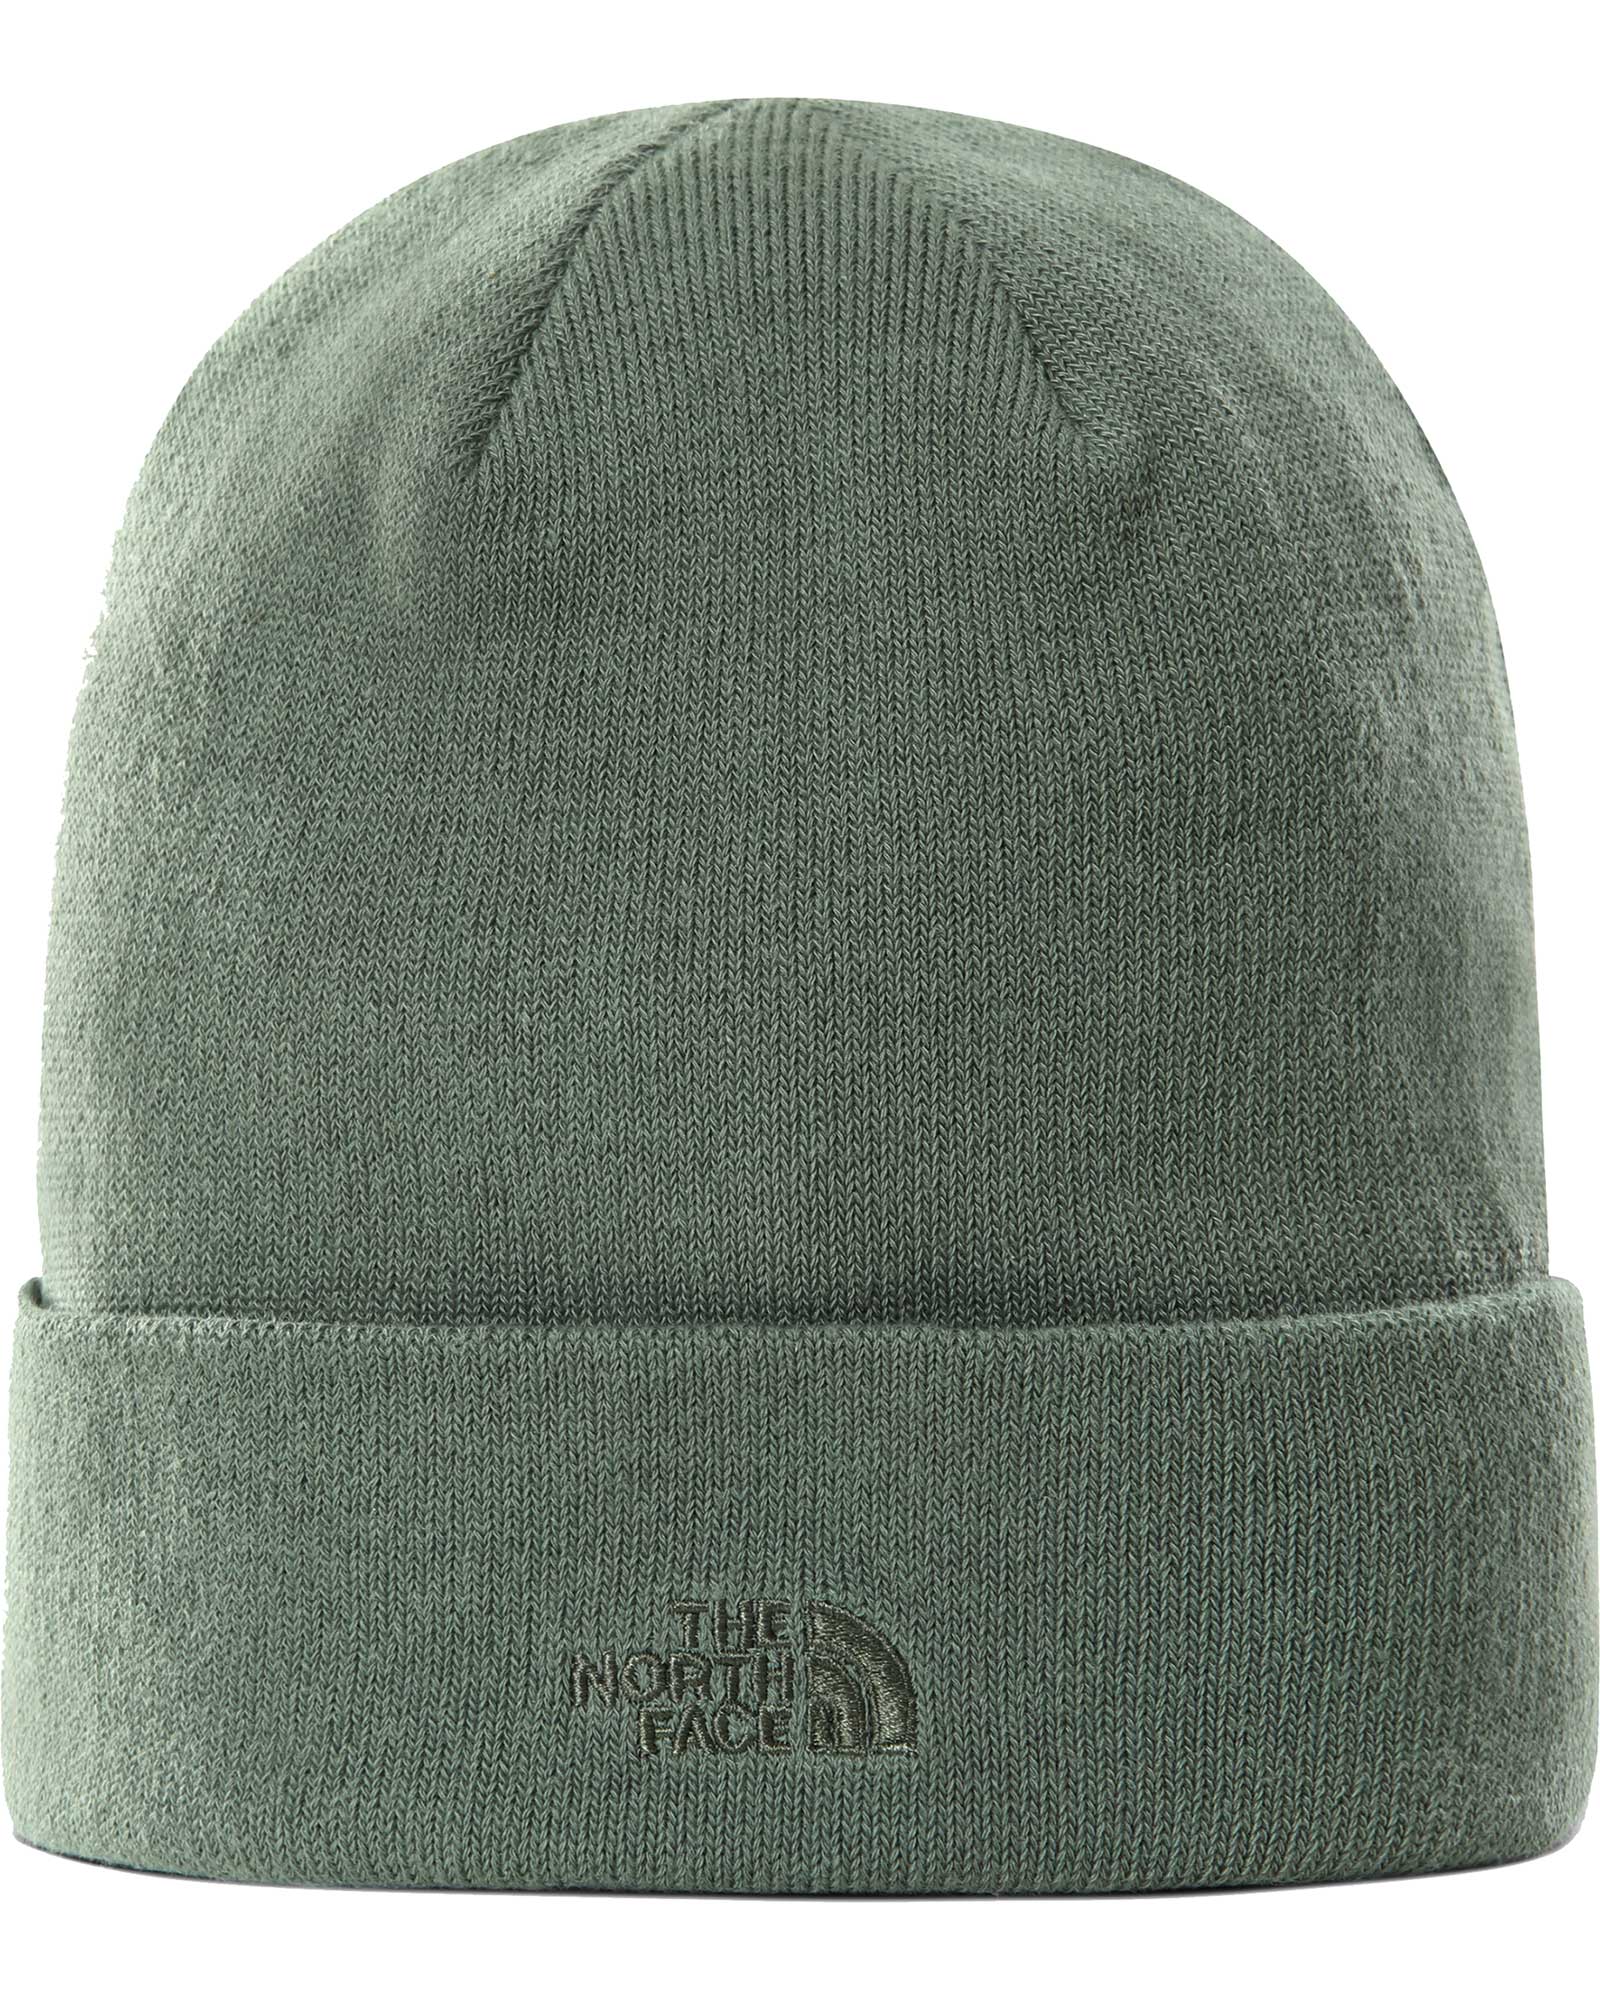 The North Face Norm Beanie - Laurel Wreath Green